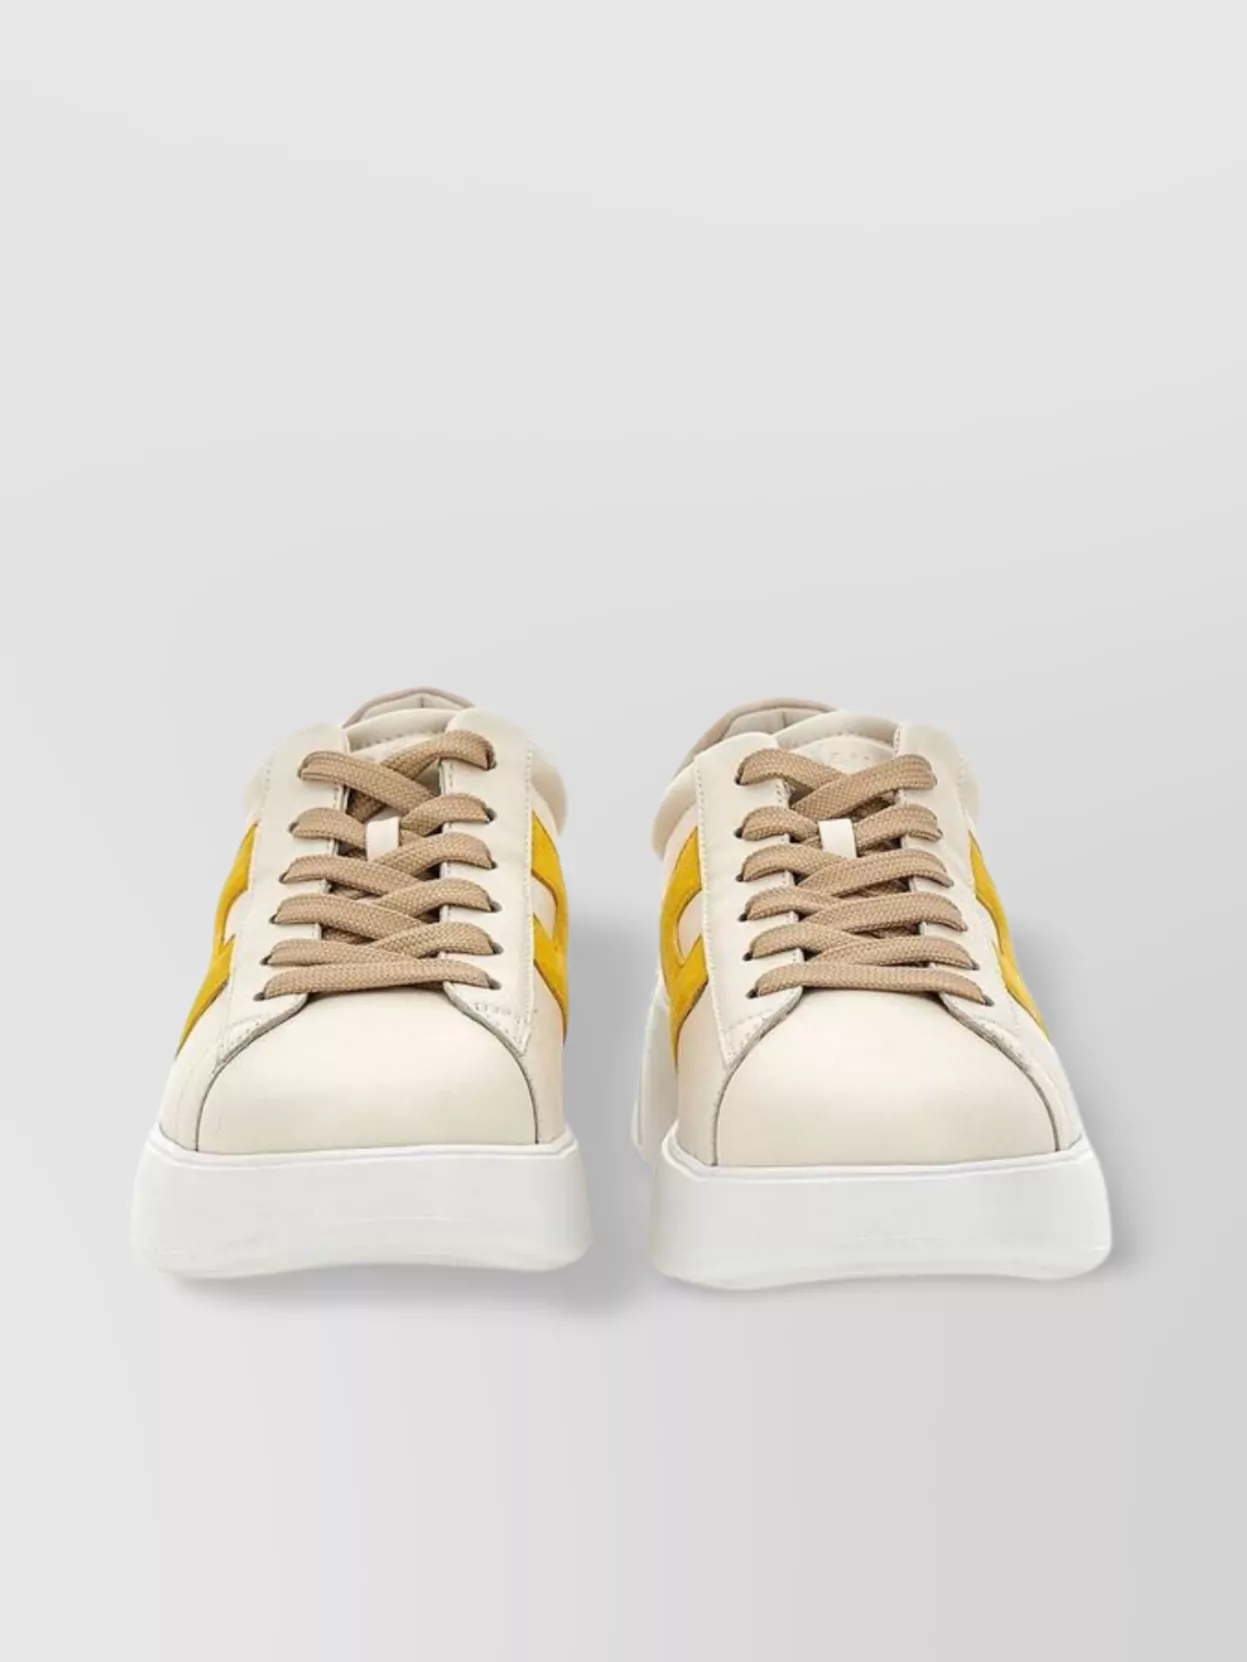 Shop Hogan High-top Sneakers Featuring Hand-painted Stripes